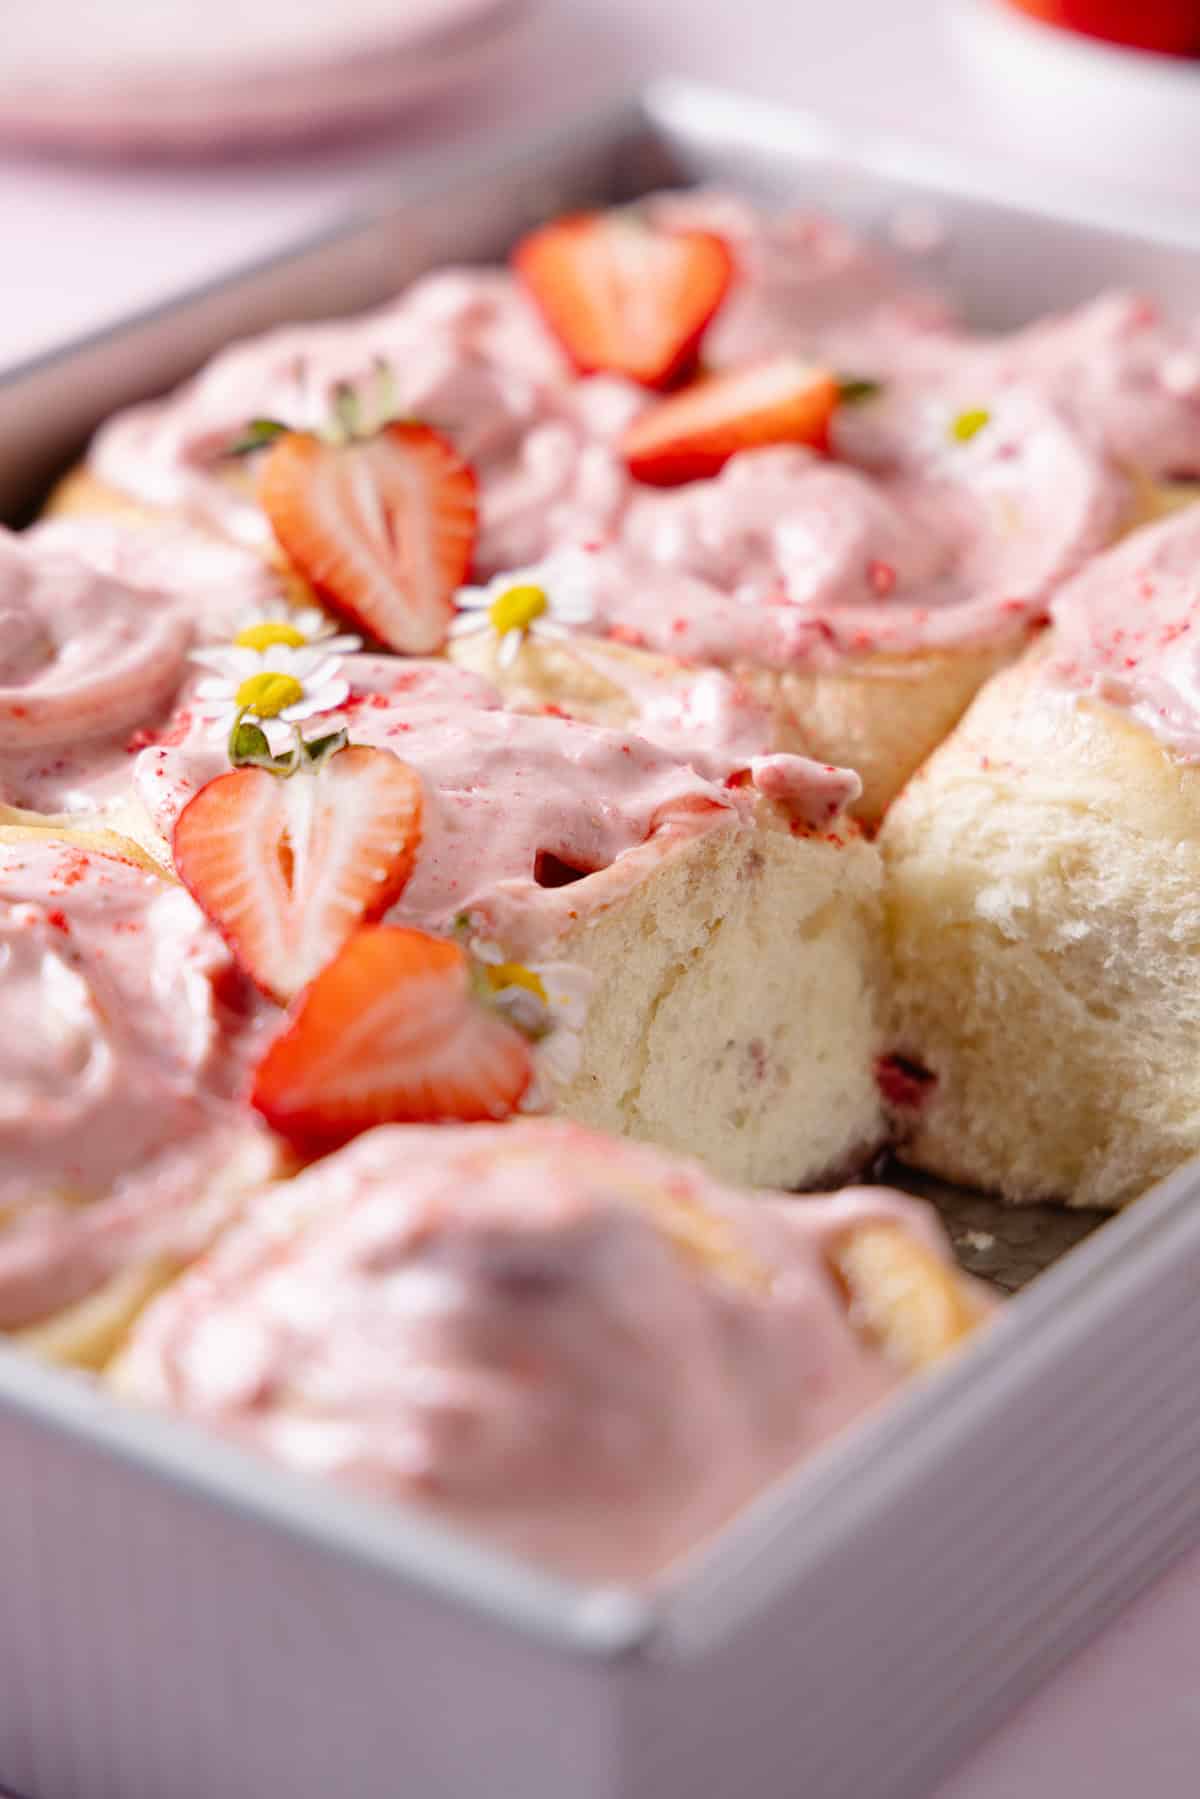 Frosted Strawberry Cinnamon Rolls in a baking tray garnished with fresh strawberries and flowers. A roll is missing from the tray, showing fluffy texture.